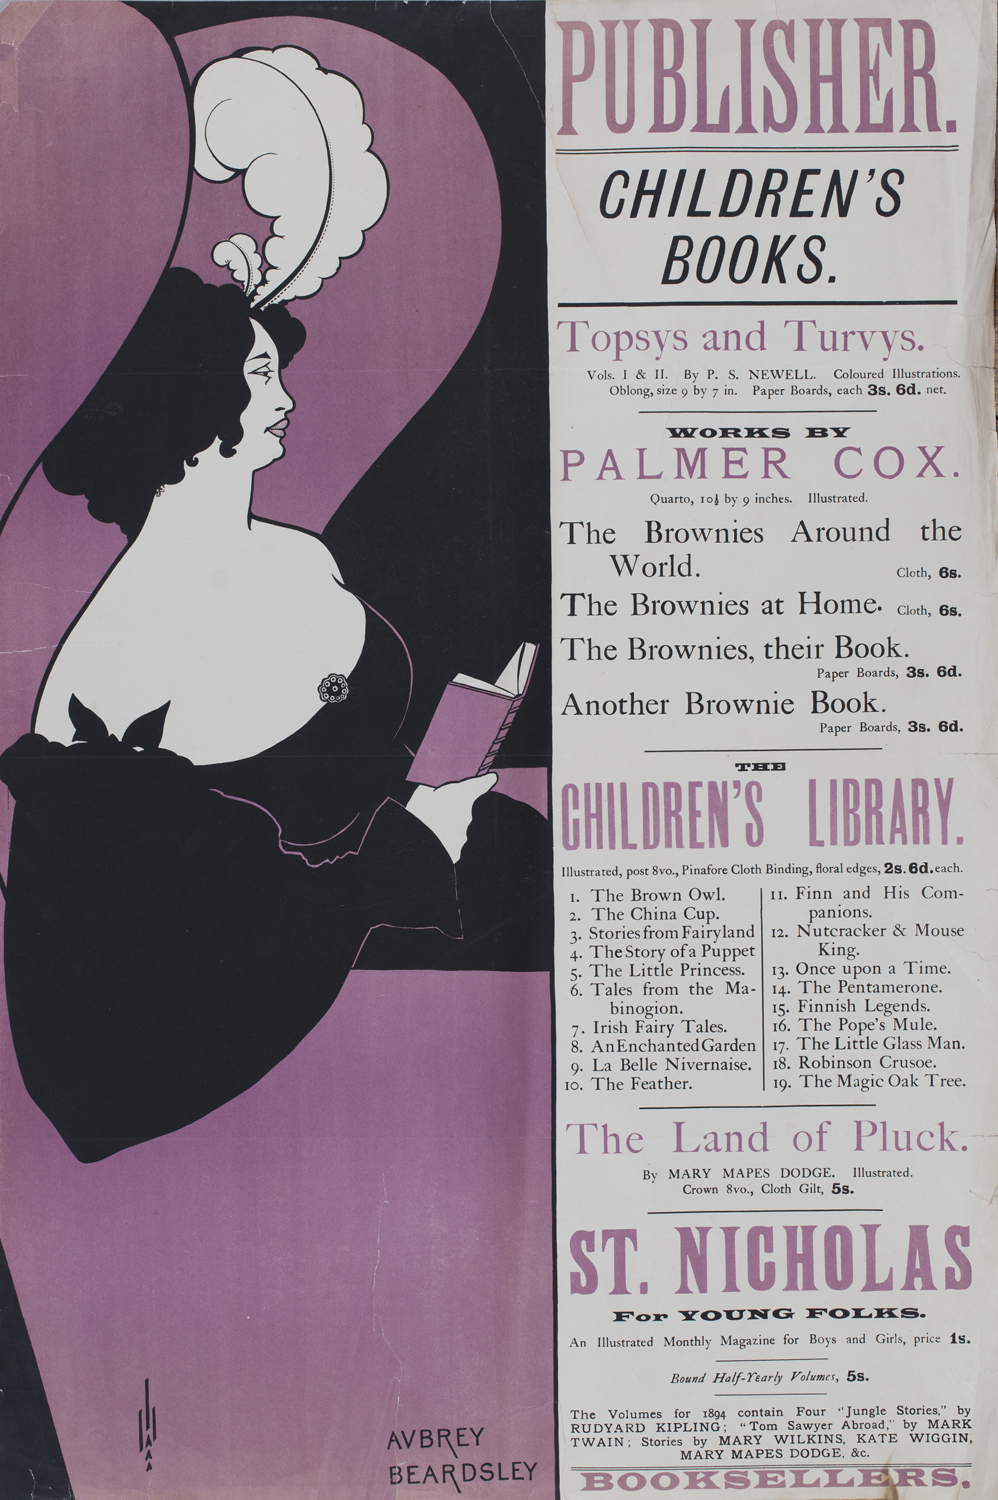 Aubrey Beardsley, Advertisement for Children’s Books, 1894, private collection.